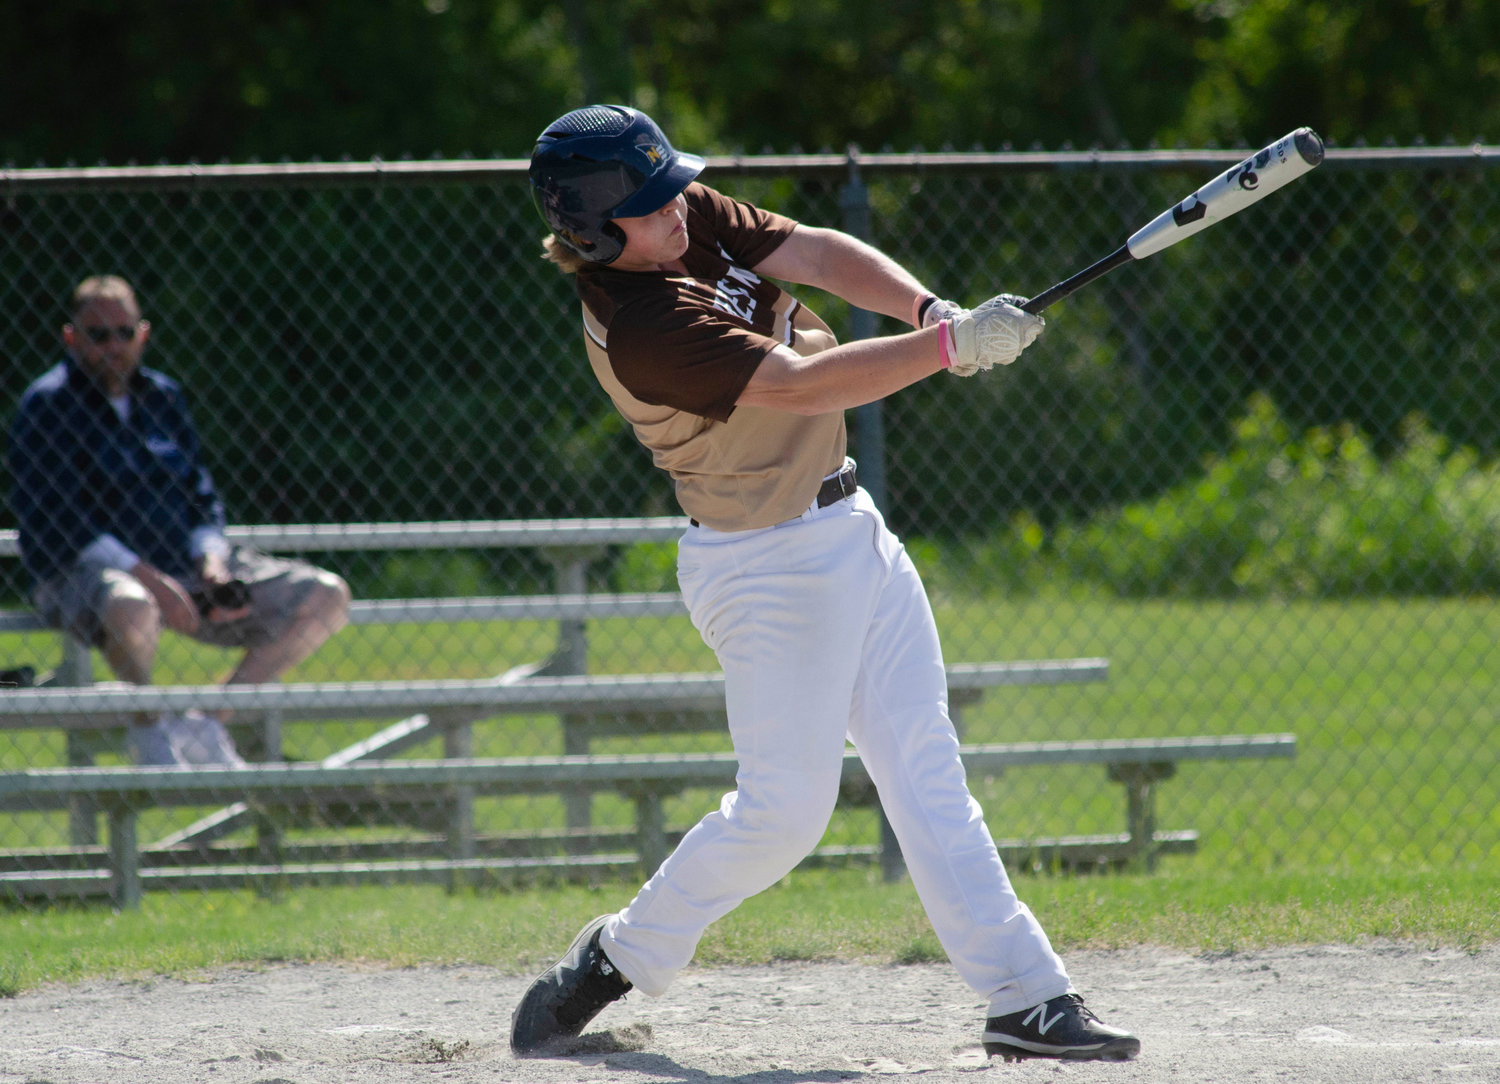 Connor James smashes one of his three hits during the team's game against West Bridgewater.